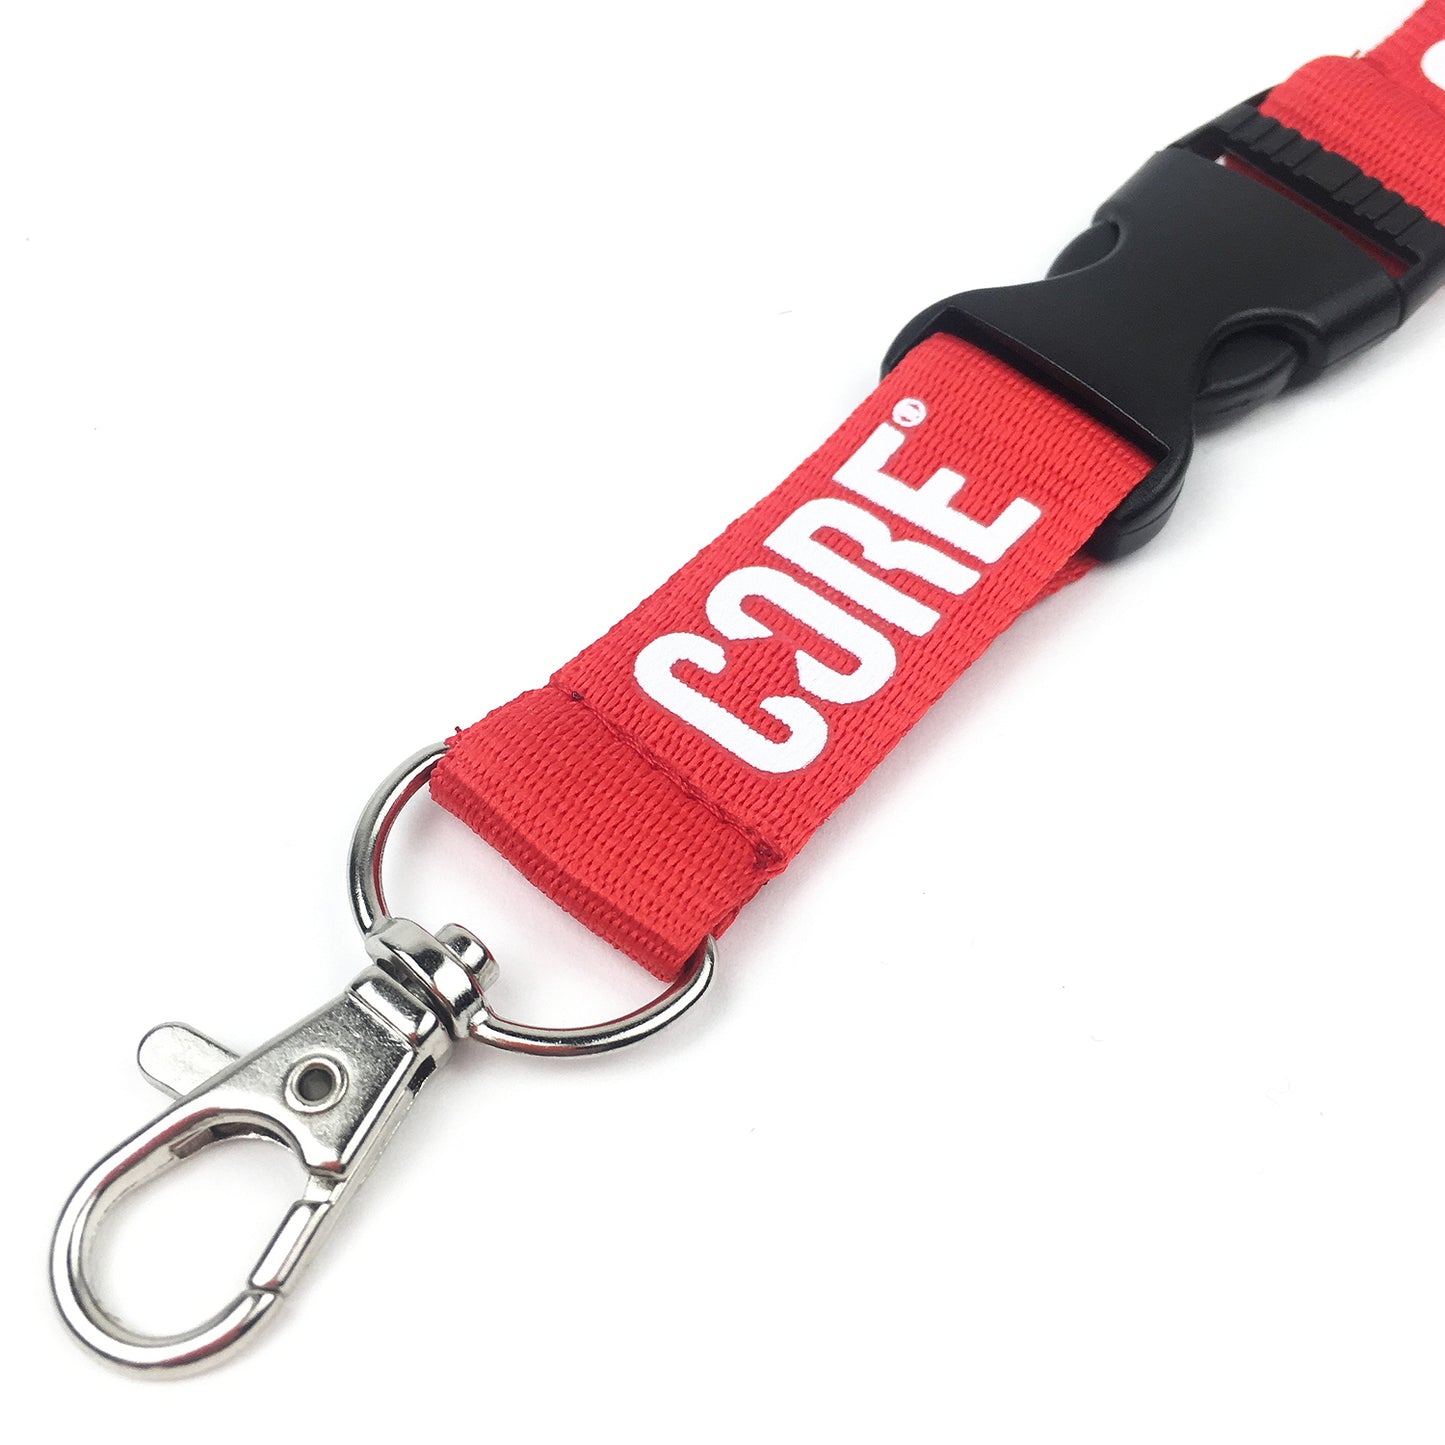 Core Lanyard - Red - Prime Delux Store